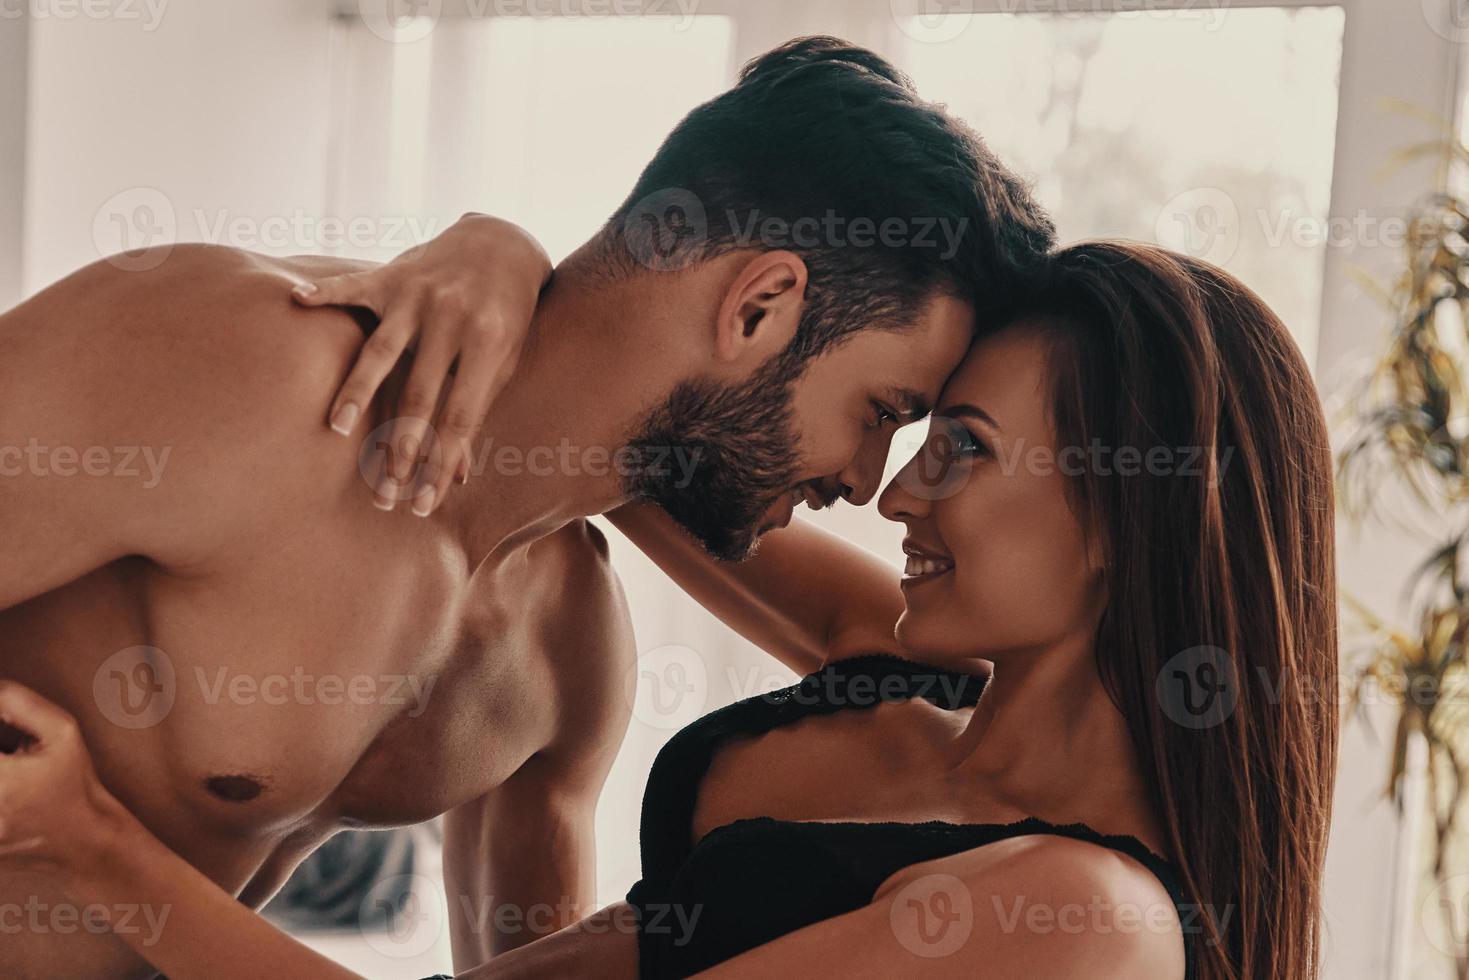 Falling in love. Beautiful young couple embracing and smiling while standing face to face in the bedroom photo